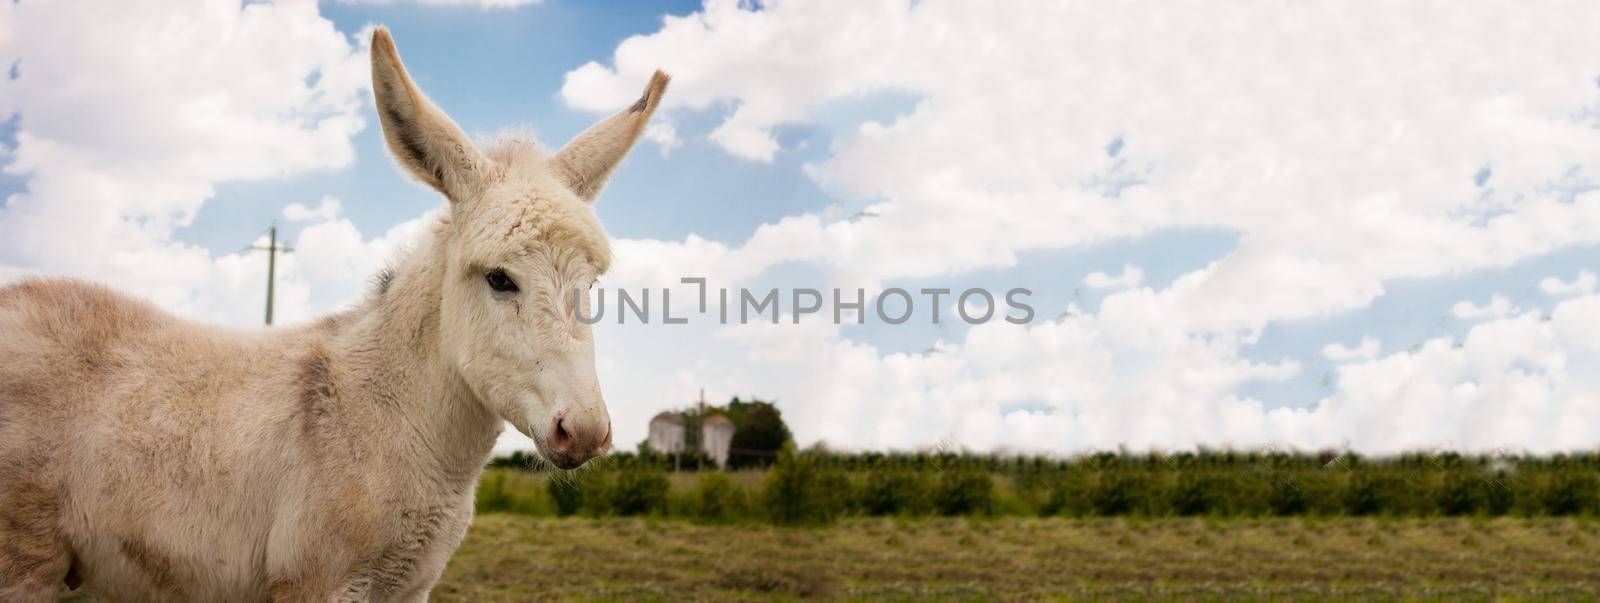 Donkey countryside banner by pippocarlot